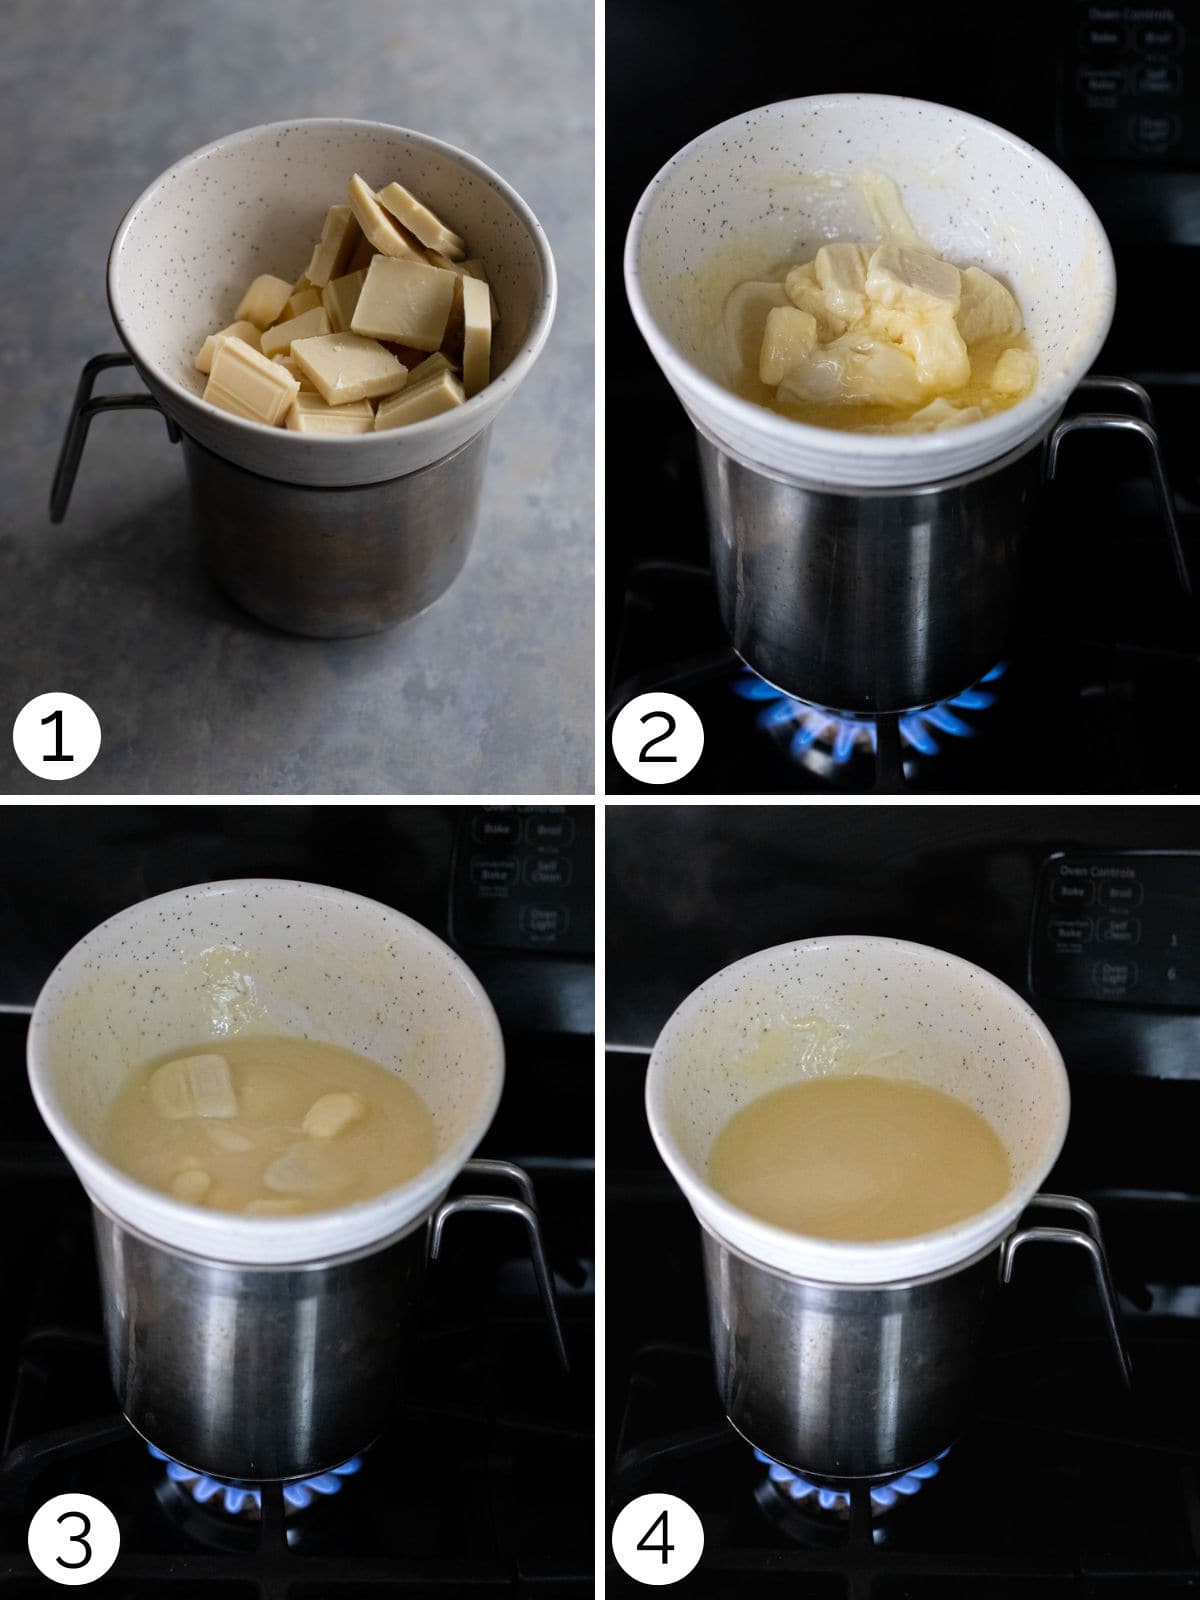 Process photos showing how to melt white chocolate in a double boiler.